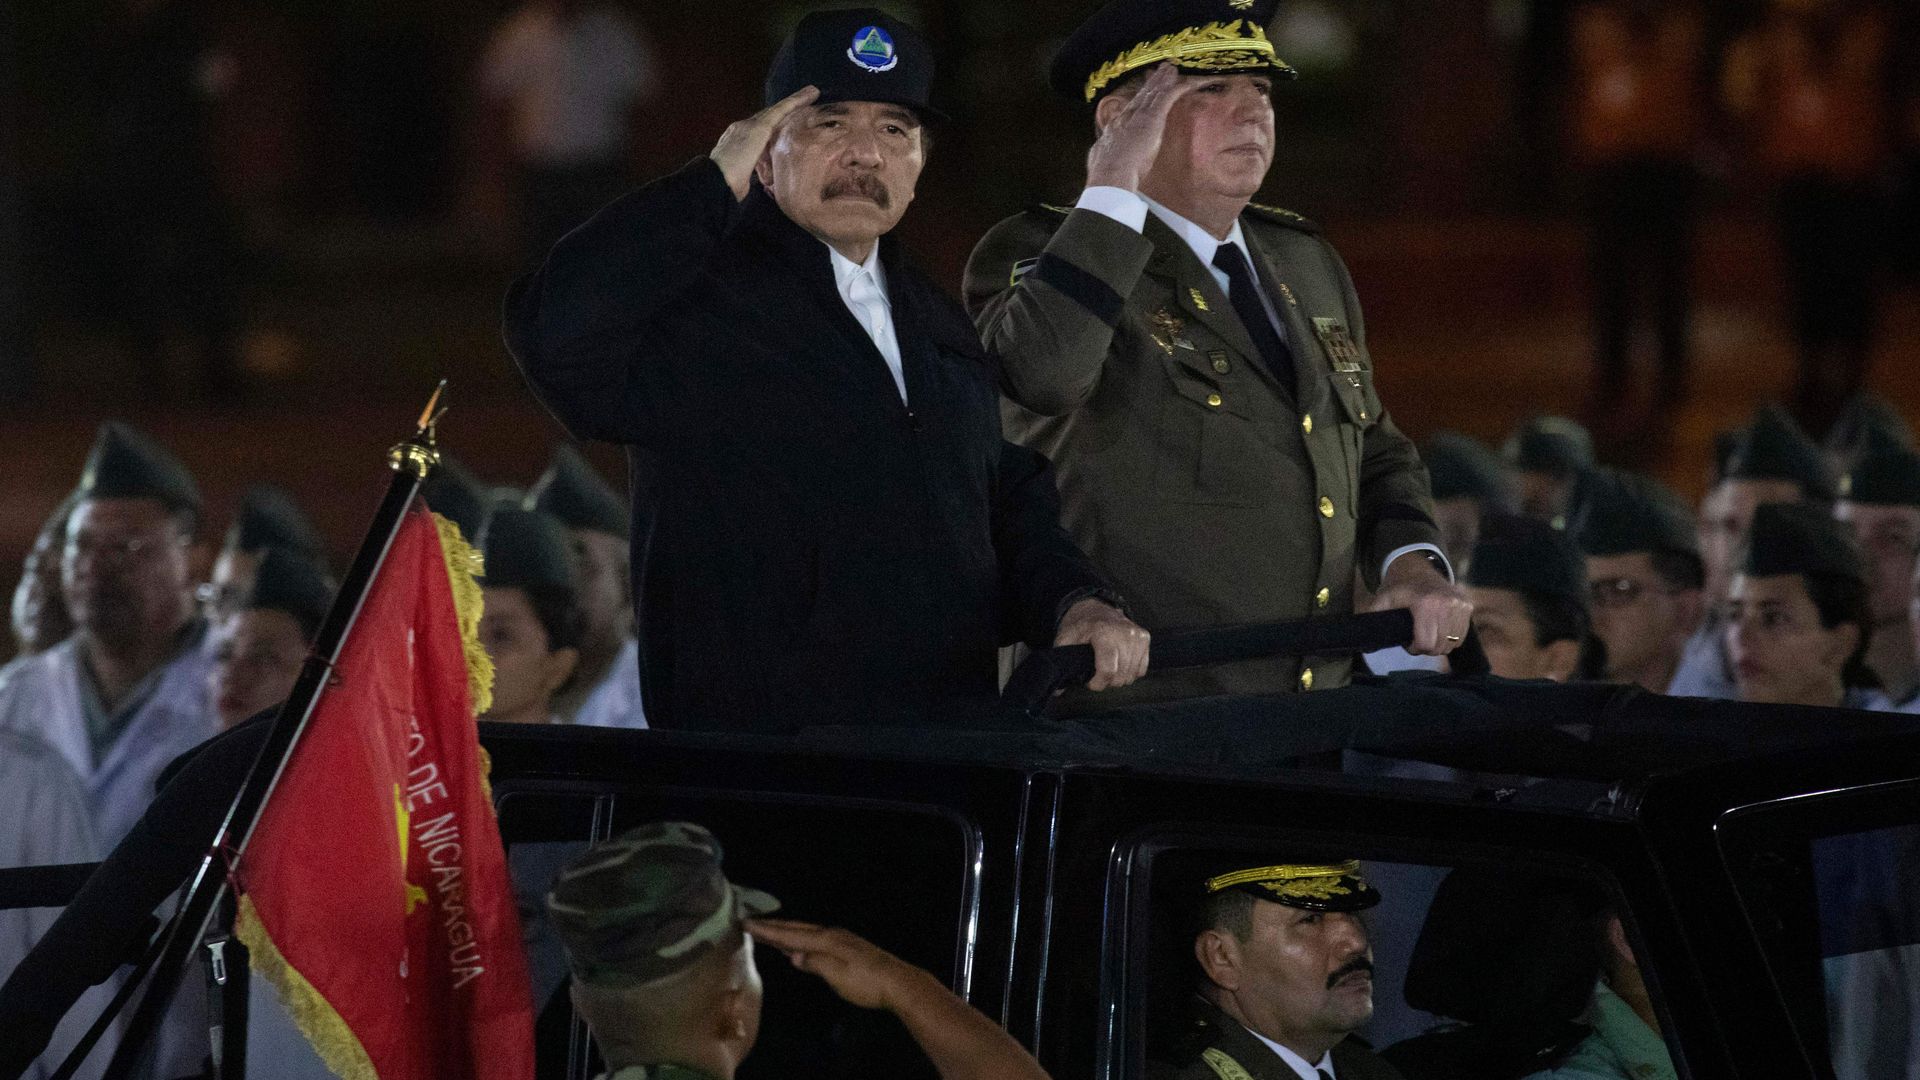  Nicaragua's President Daniel Ortega (L) and Commander in Chief of the Nicaraguan Army General Julio Aviles salute during a ceremony at Revolution Square in Managua, on February 21, 2020.